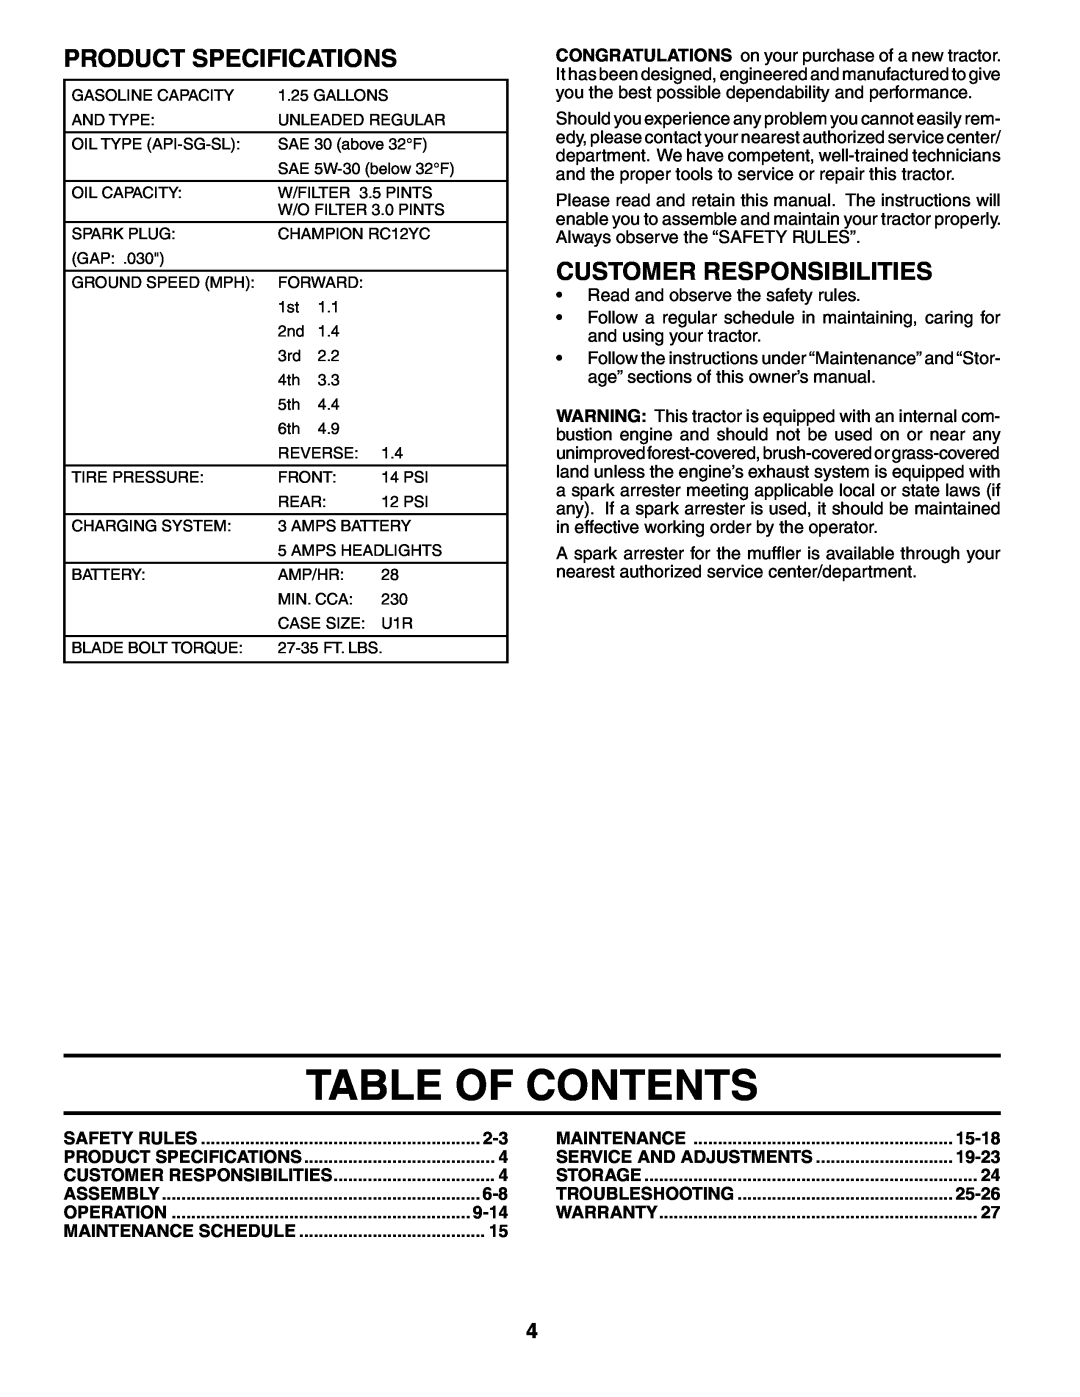 Poulan 195506 manual Table Of Contents, Product Specifications, Customer Responsibilities 